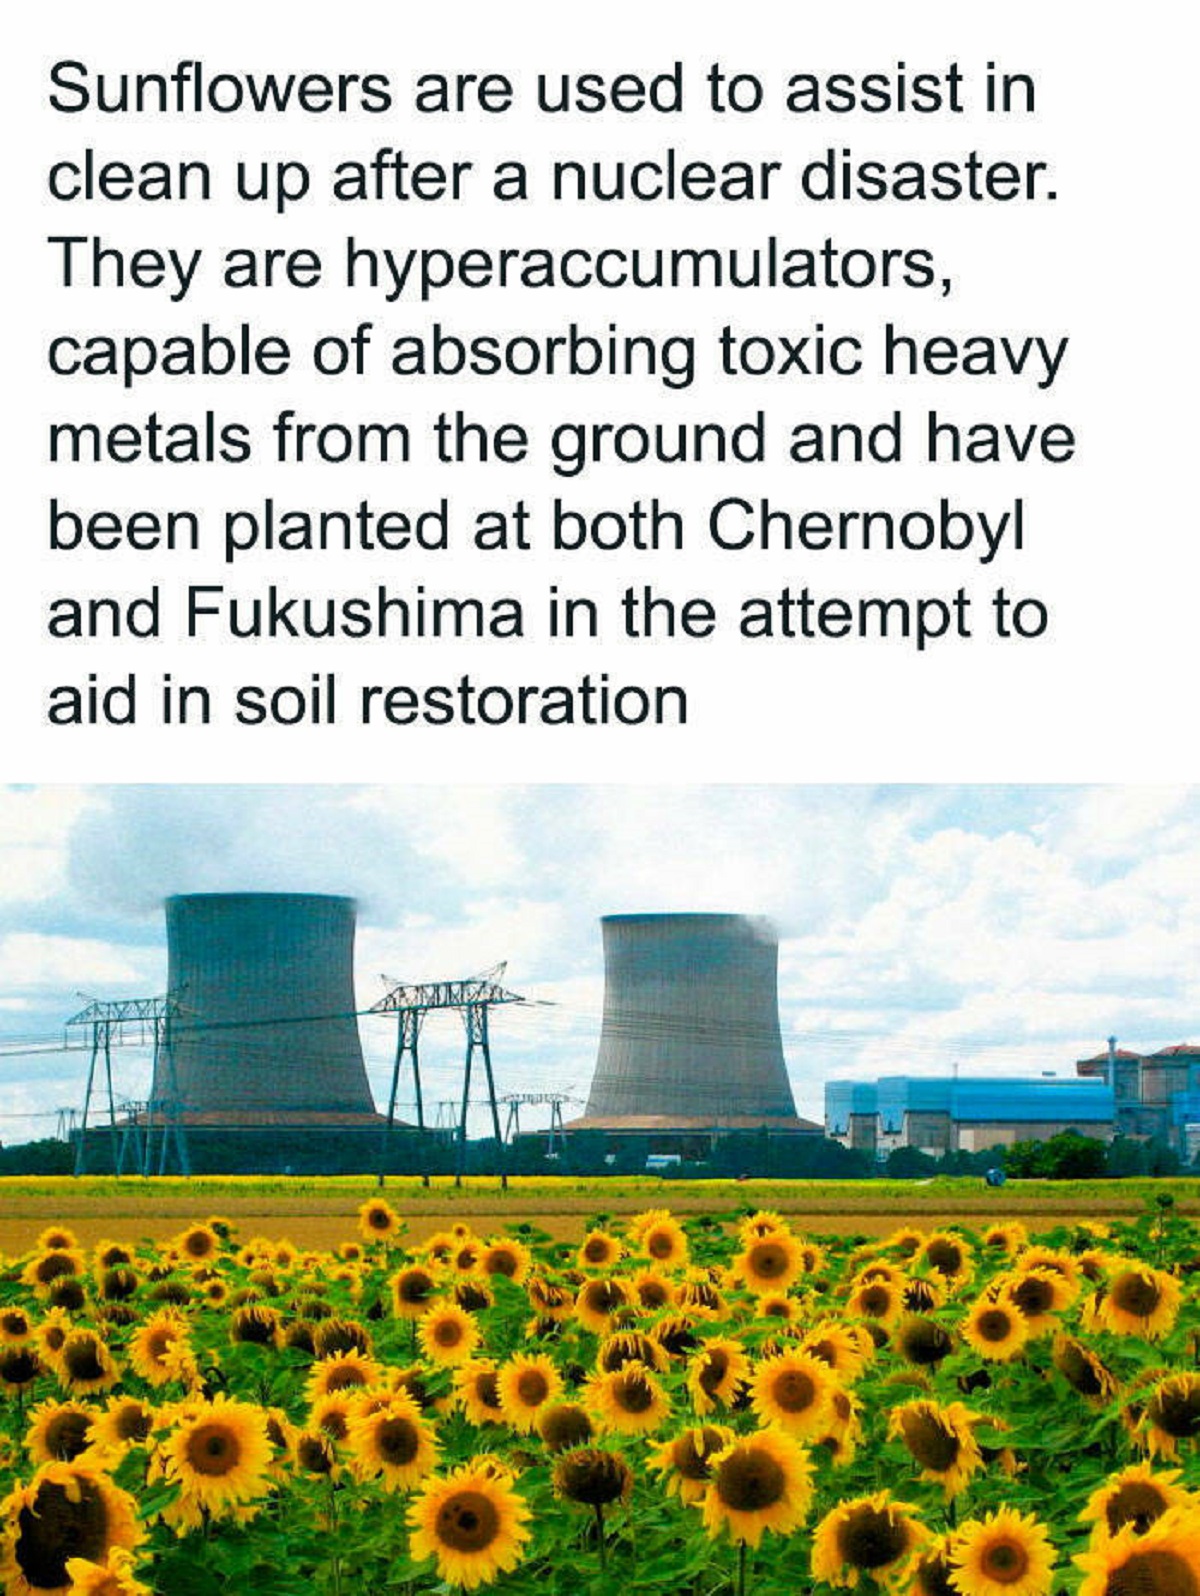 Sunflowers are used to assist in clean up after a nuclear disaster. They are hyperaccumulators, capable of absorbing toxic heavy metals from the ground and have been planted at both Chernobyl and Fukushima in the attempt to aid in soil restoration